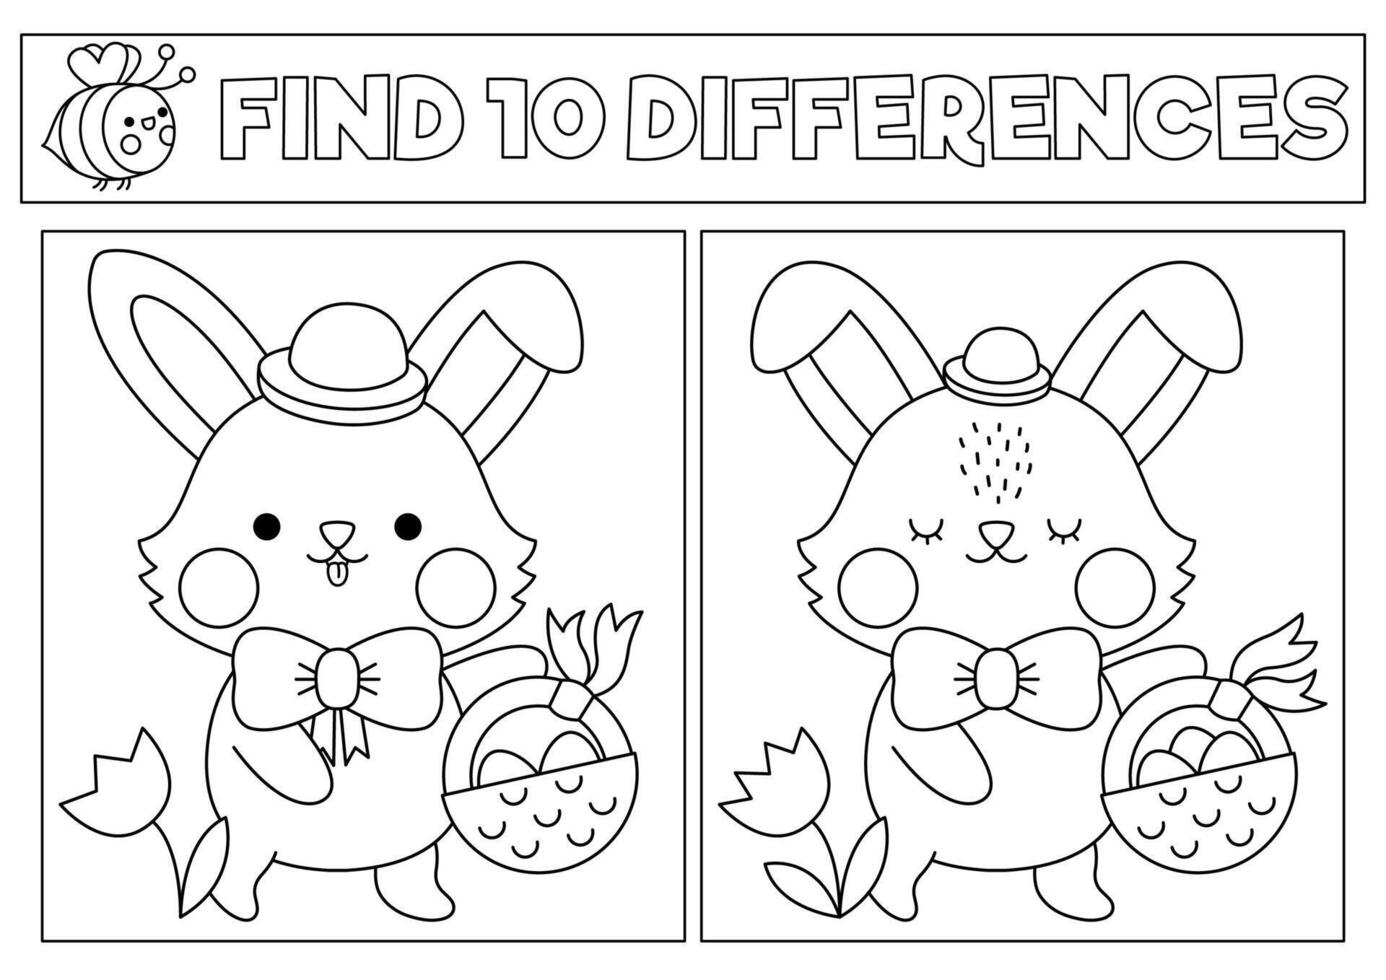 Easter black and white kawaii find differences game. Coloring page with cute bunny going on egg hunt with basket. Spring holiday puzzle or activity for kids. Printable what is different worksheet vector